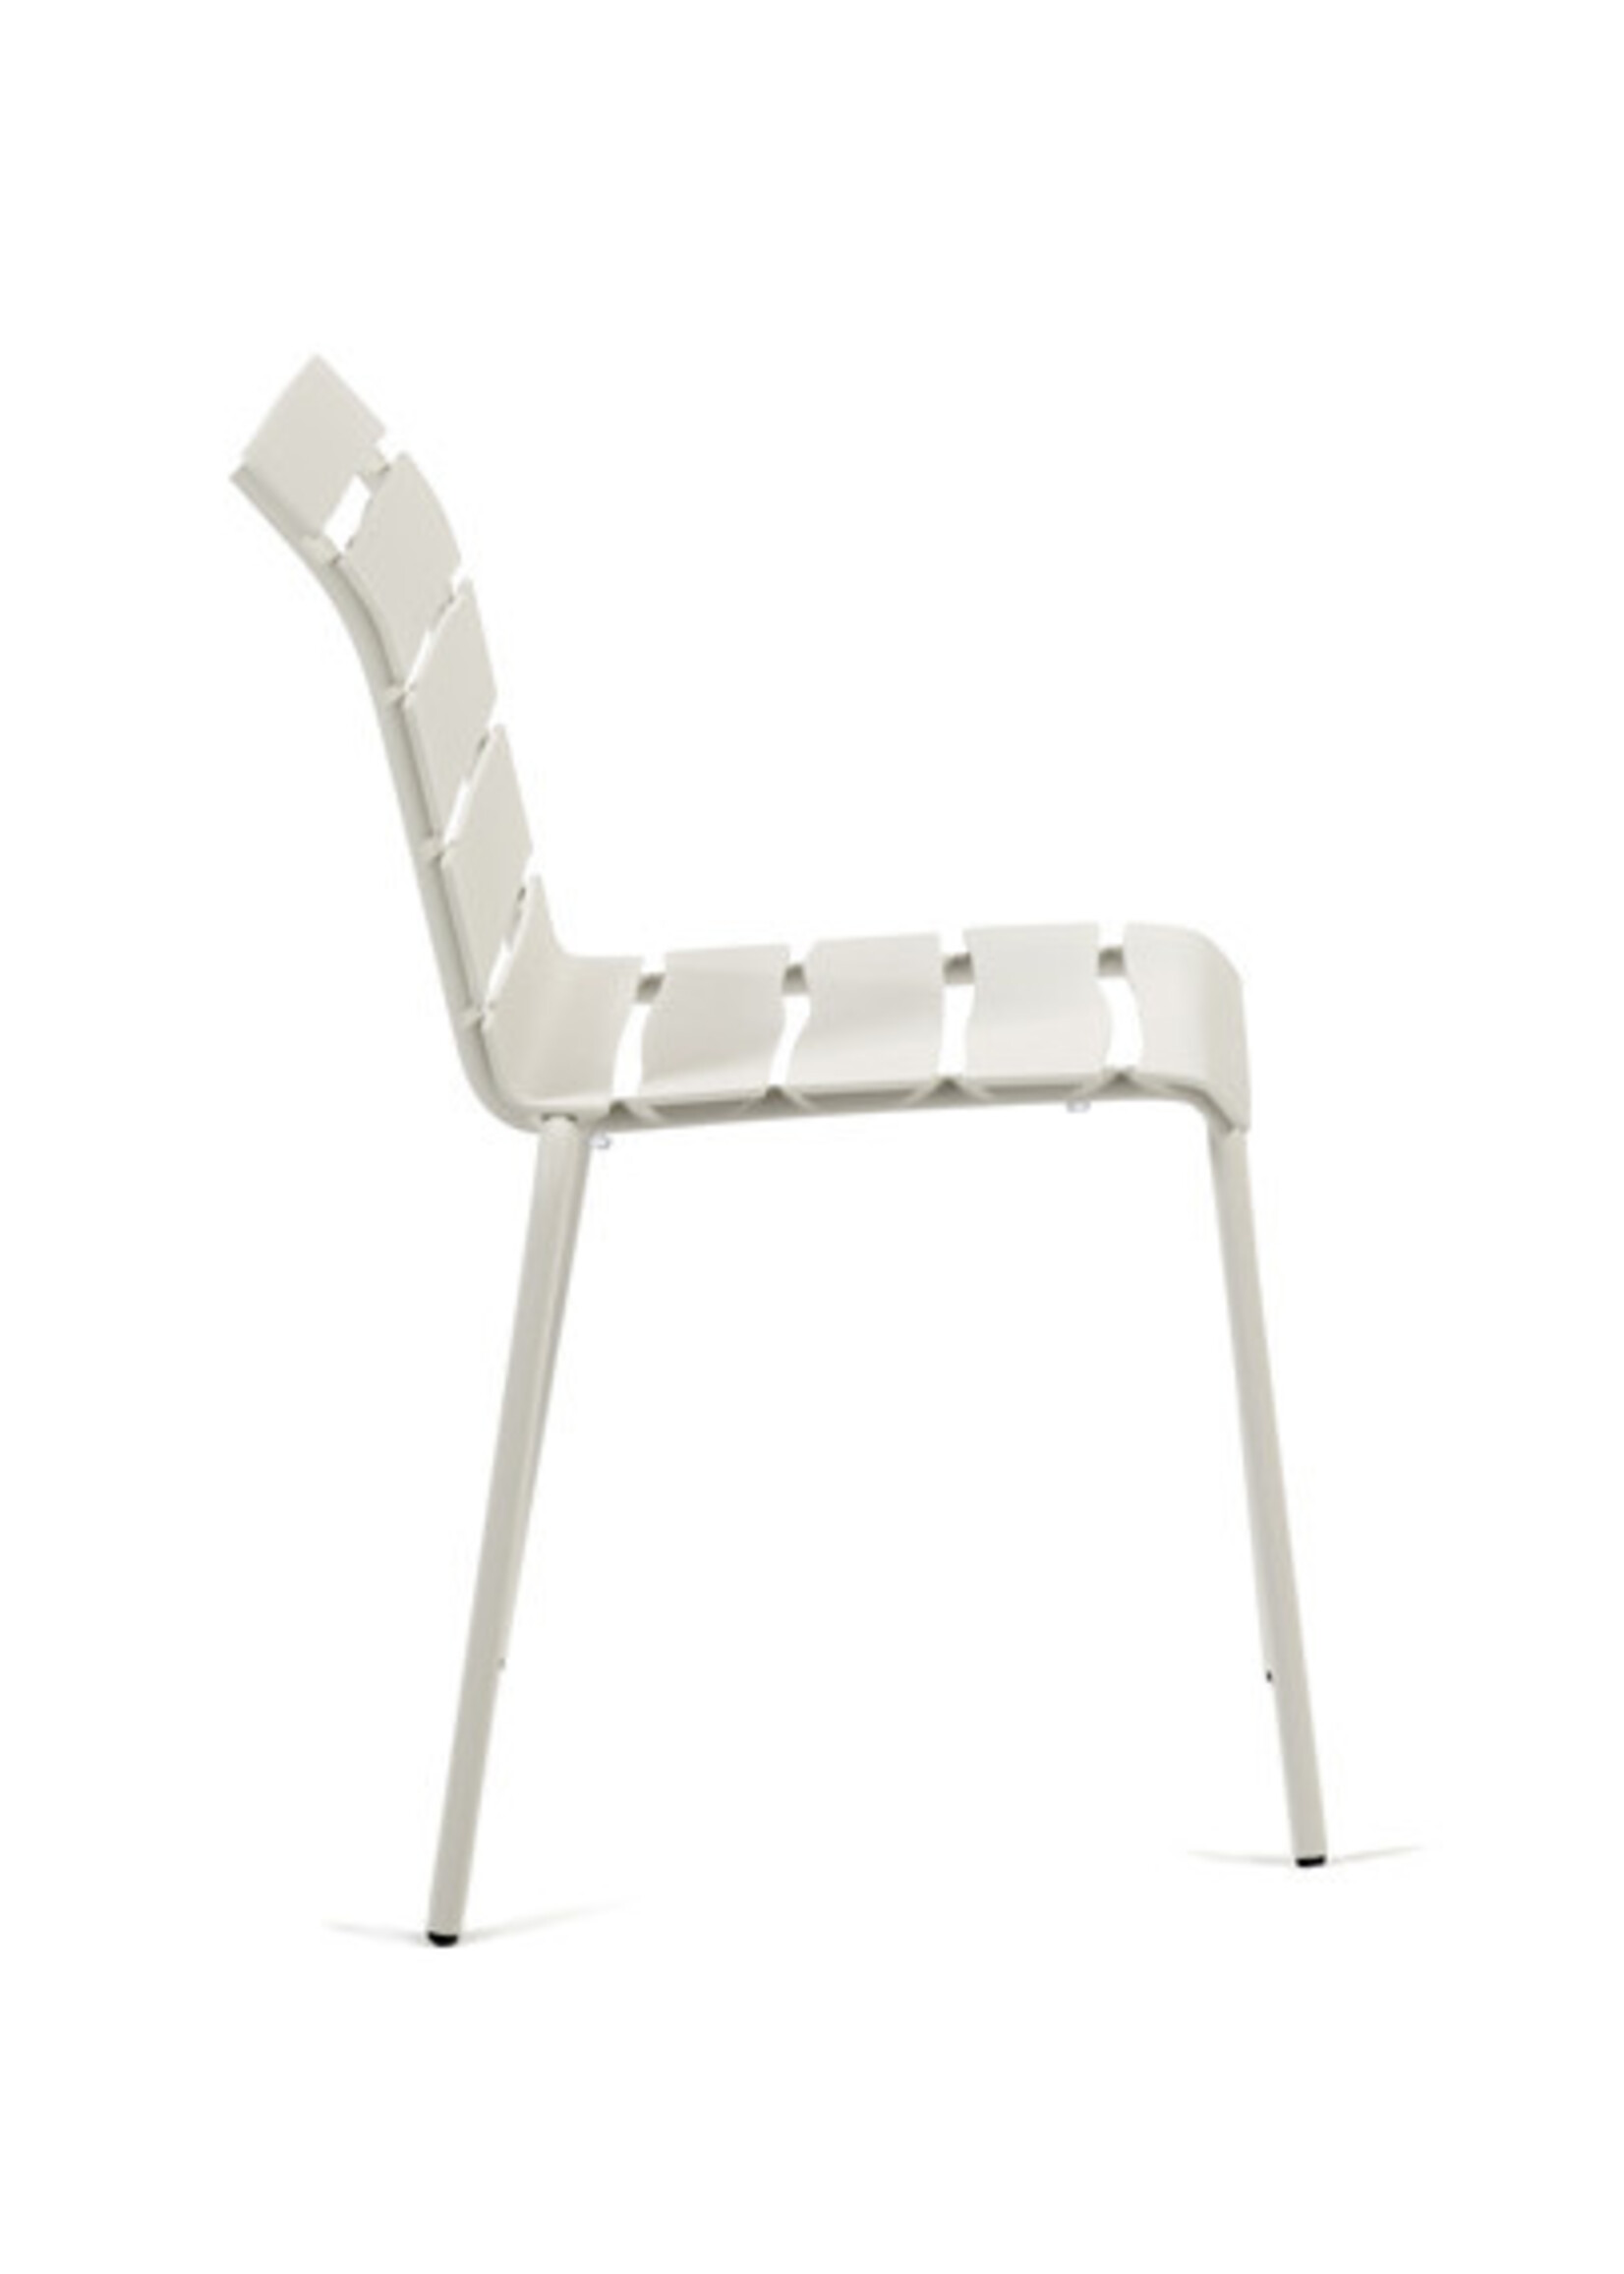 Valerie Objects Aligned - Outdoor - Chair - Off-White